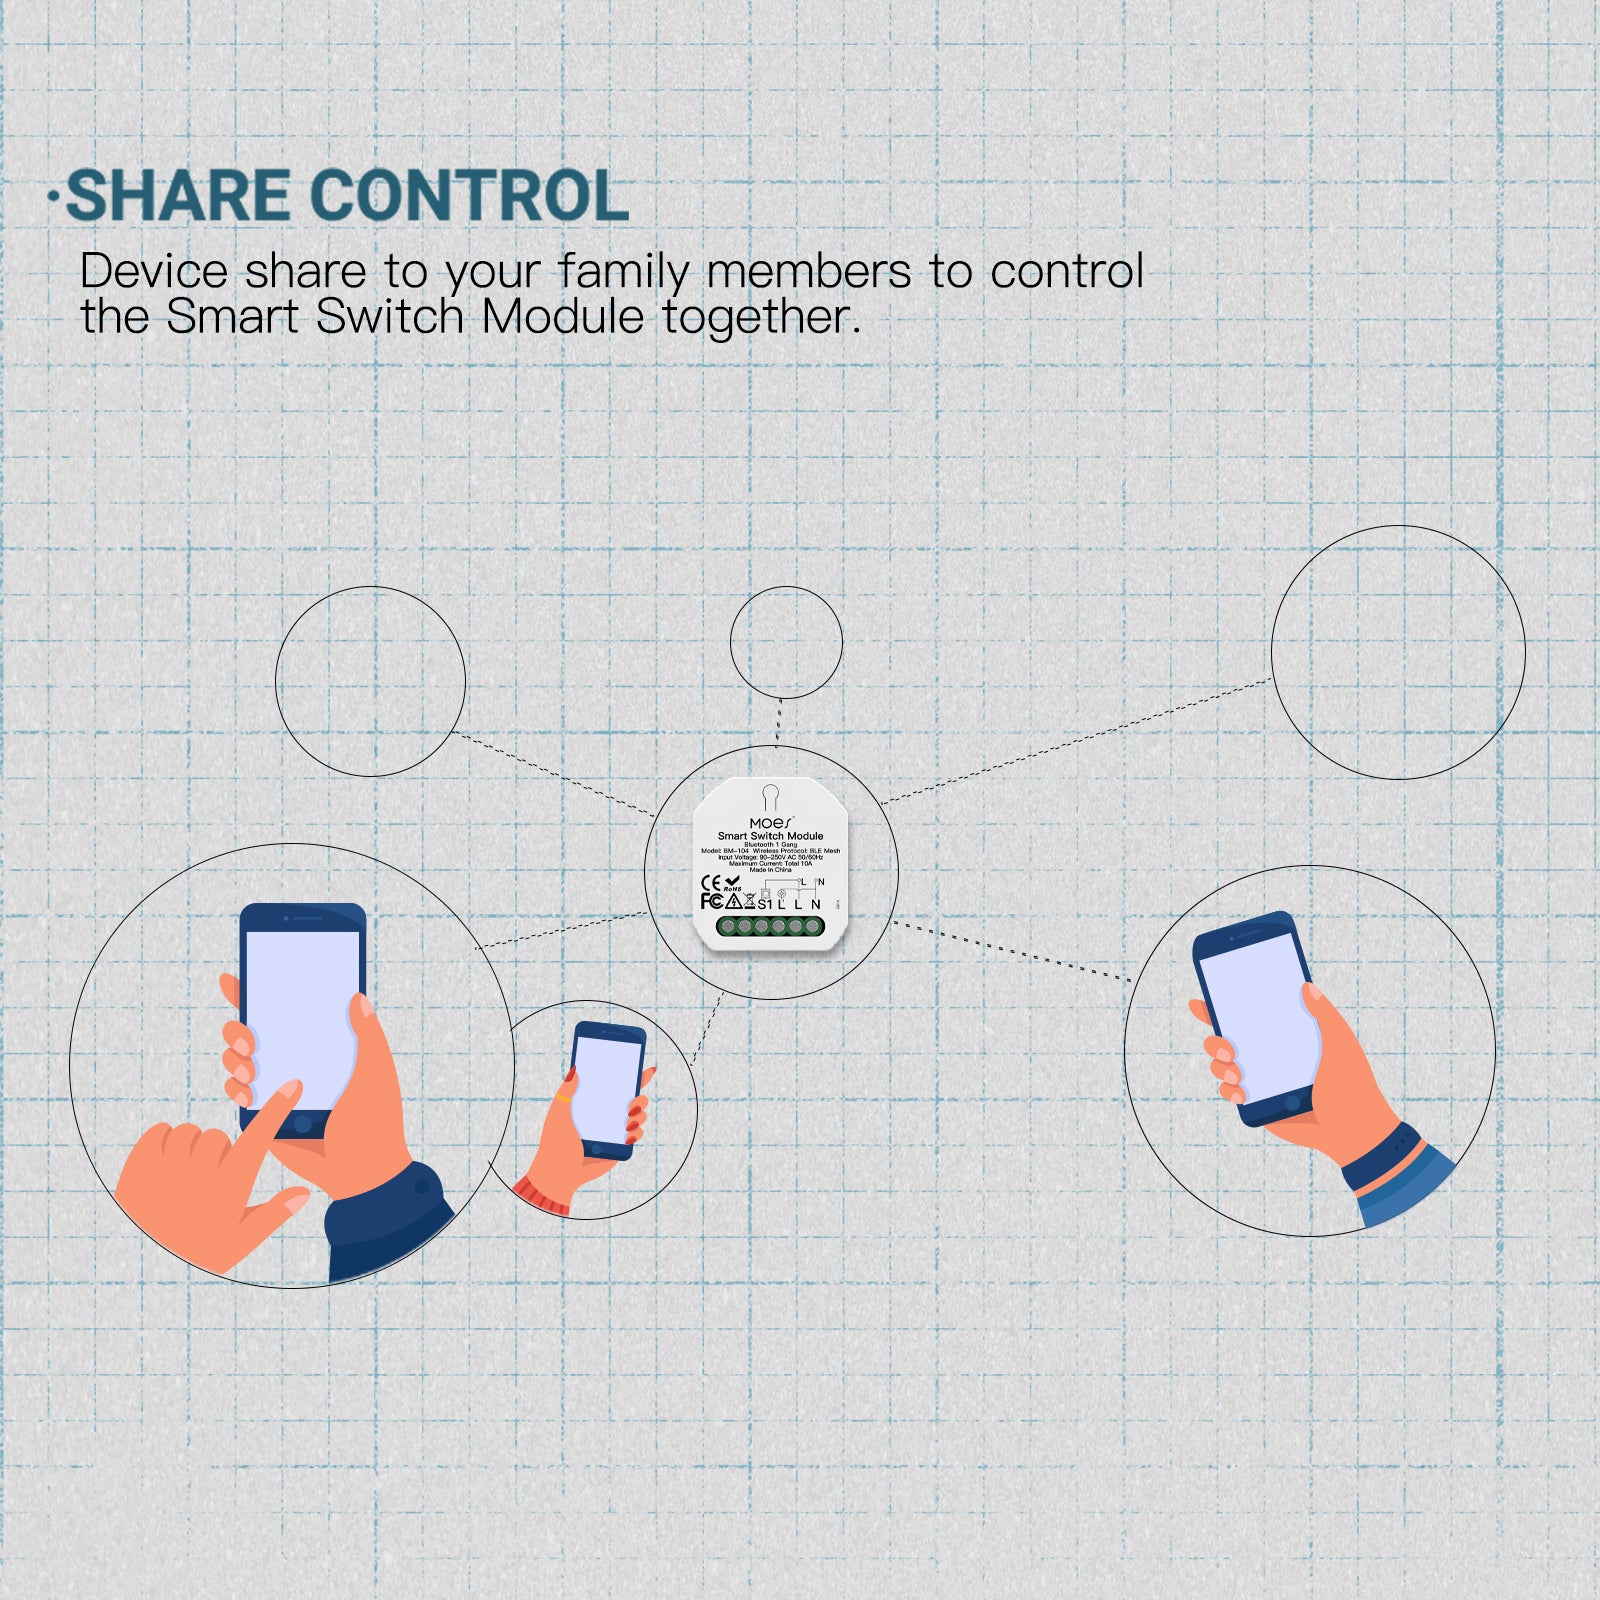 devie share to your family members to control the smart swithc module together